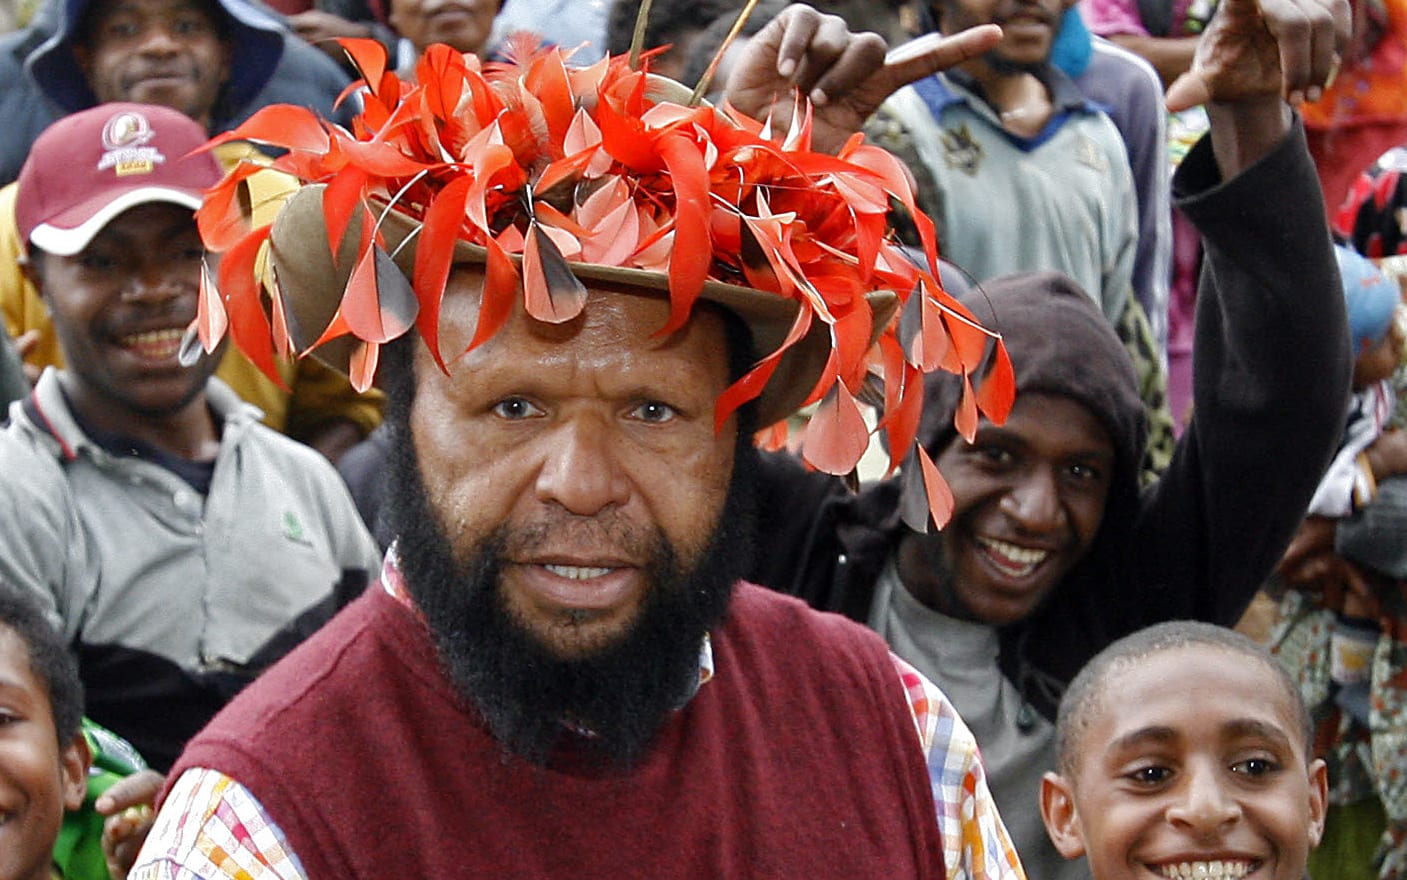 Paias Wingti (C), Governor of the Western Highlands province and former two-time PNG prime minister, wears his trademark bird of paradise hat as he returns to Ketiga village to vote during Papua New Guinea's general election, 06 July 2007.